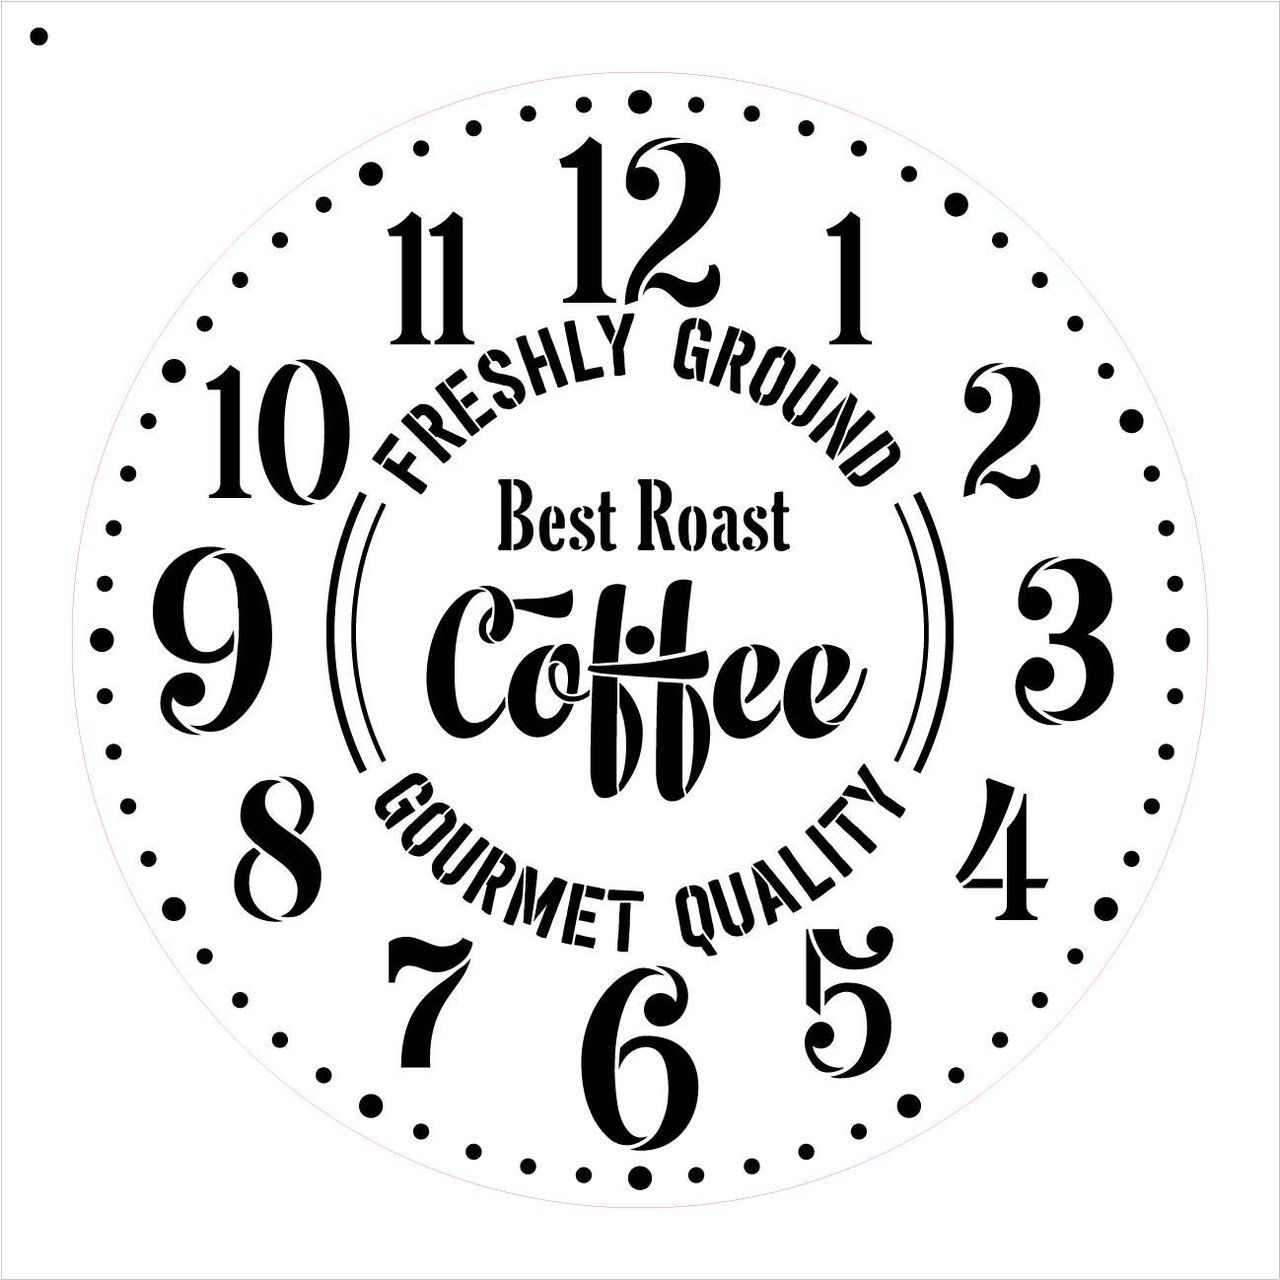 Provincial Round Coffee Clock Stencil - DIY Painting Rustic Wood Clocks Small to Extra Large for Farmhouse Country Home Decor - Select Size (22" (2 Parts))